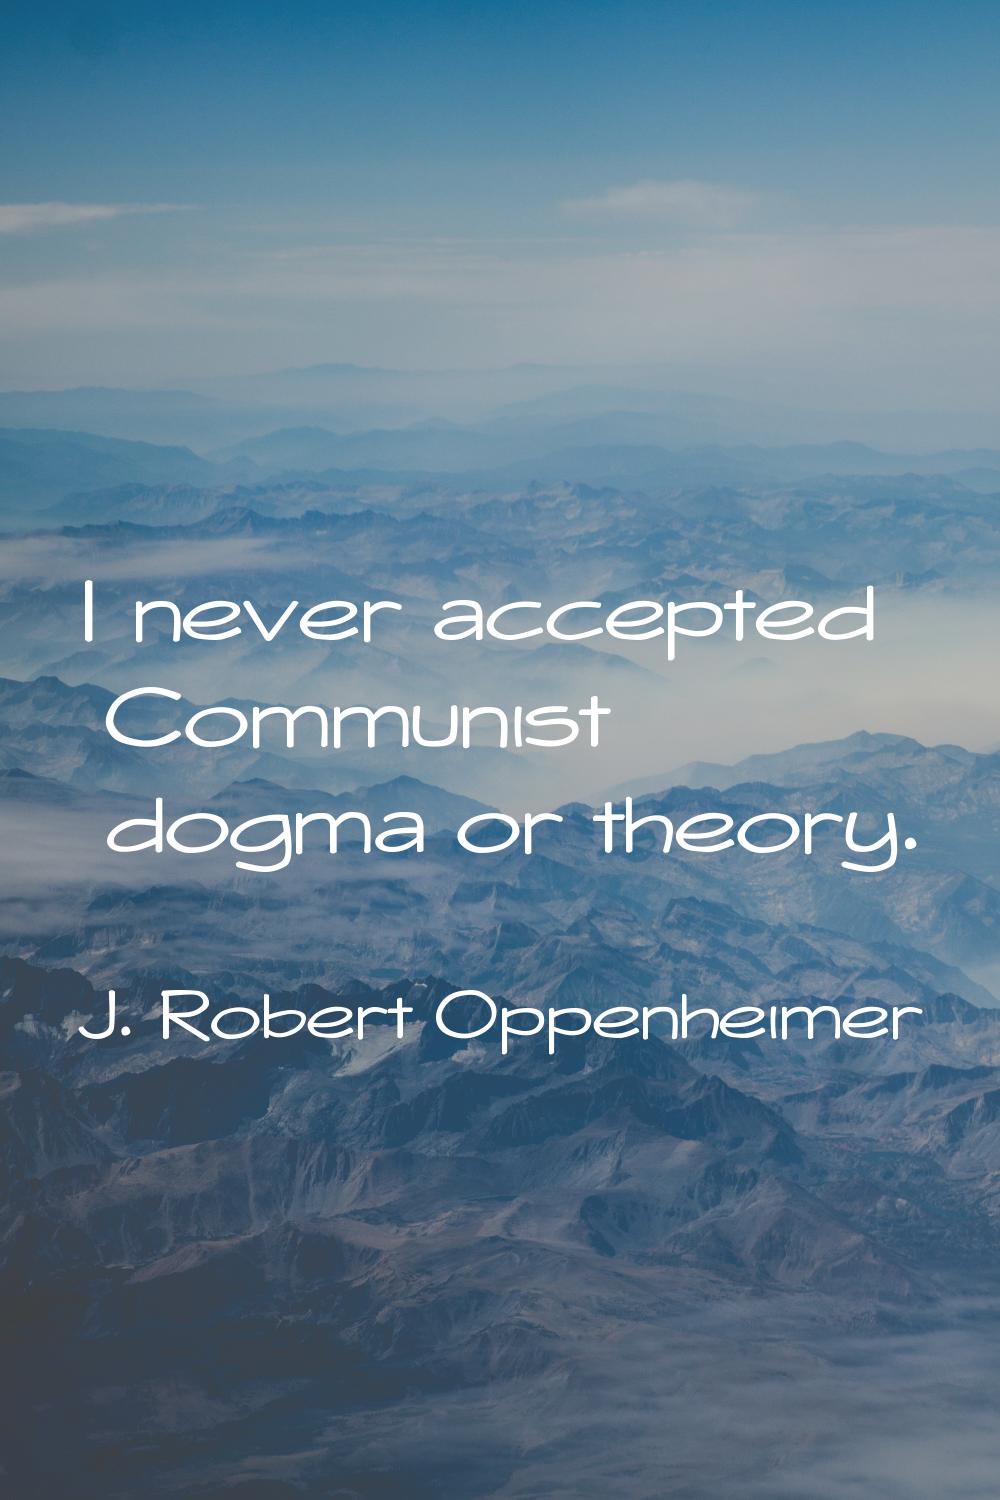 I never accepted Communist dogma or theory.